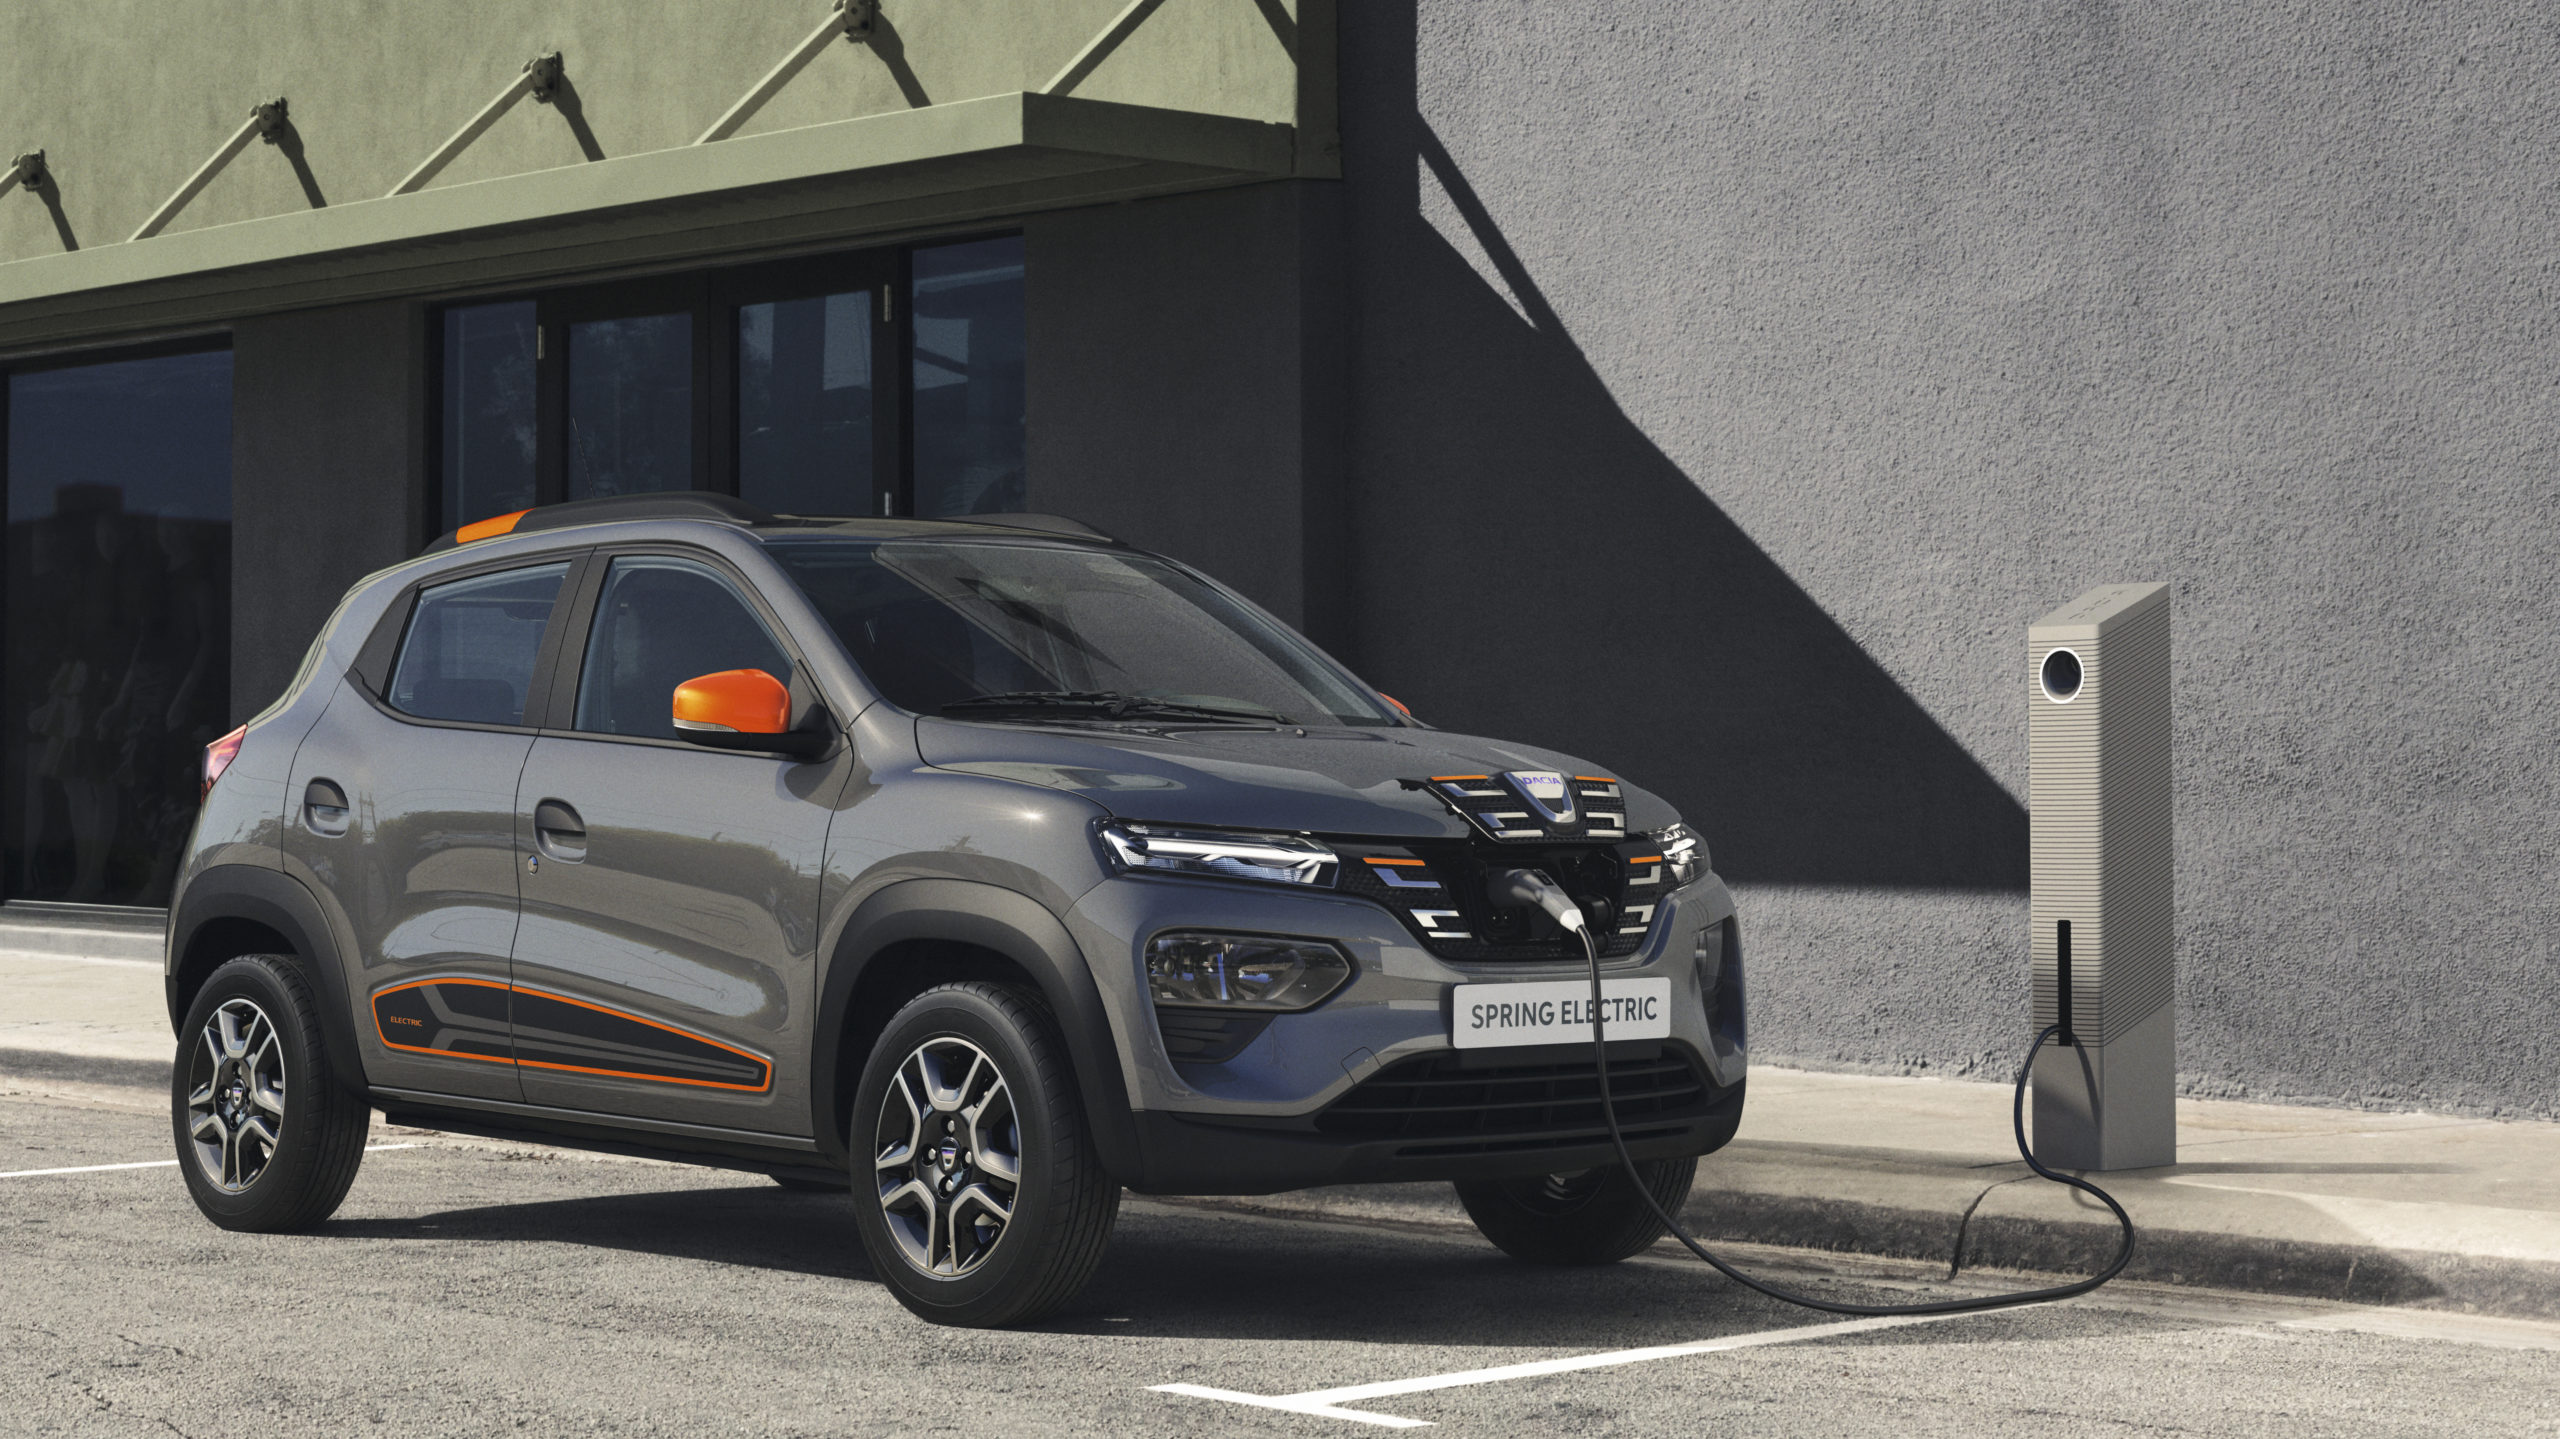 Is Dacia going to change the stakes for electric mobility?